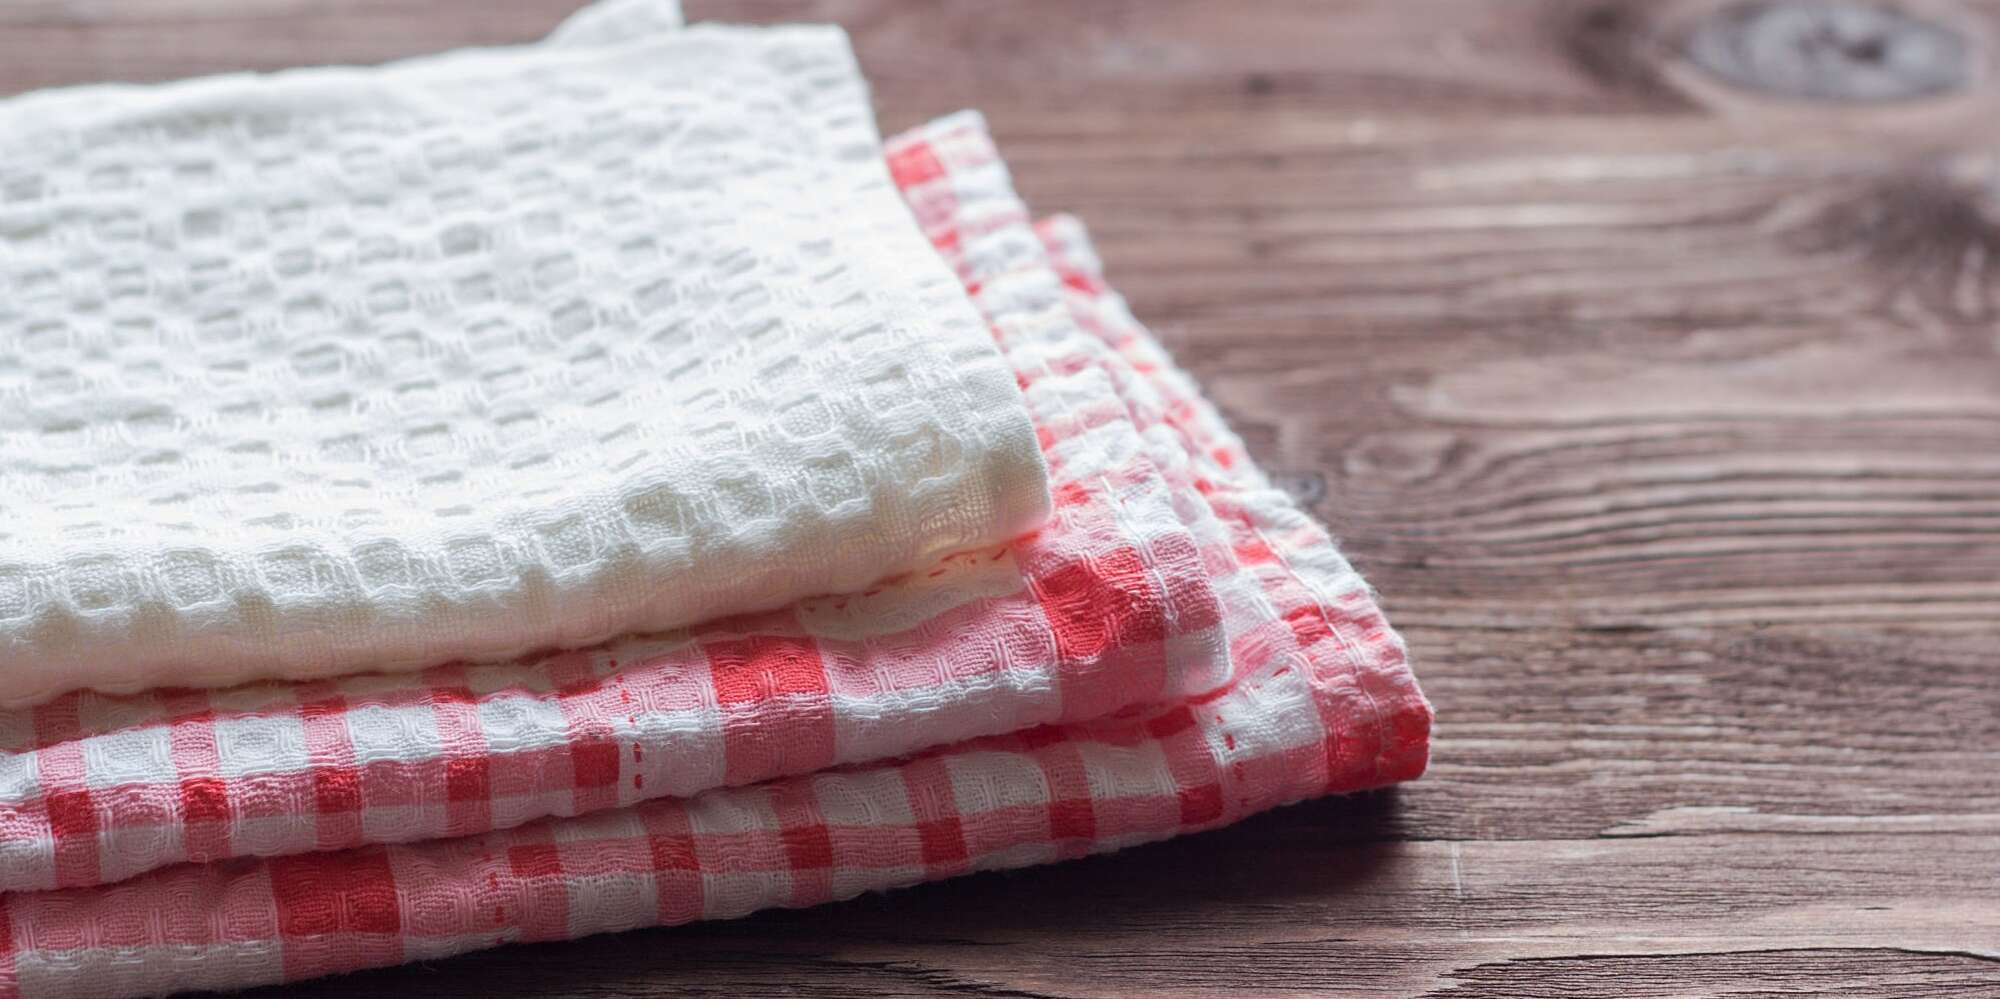 One Brilliant Trick to Keep Your Kitchen Towels Looking Great